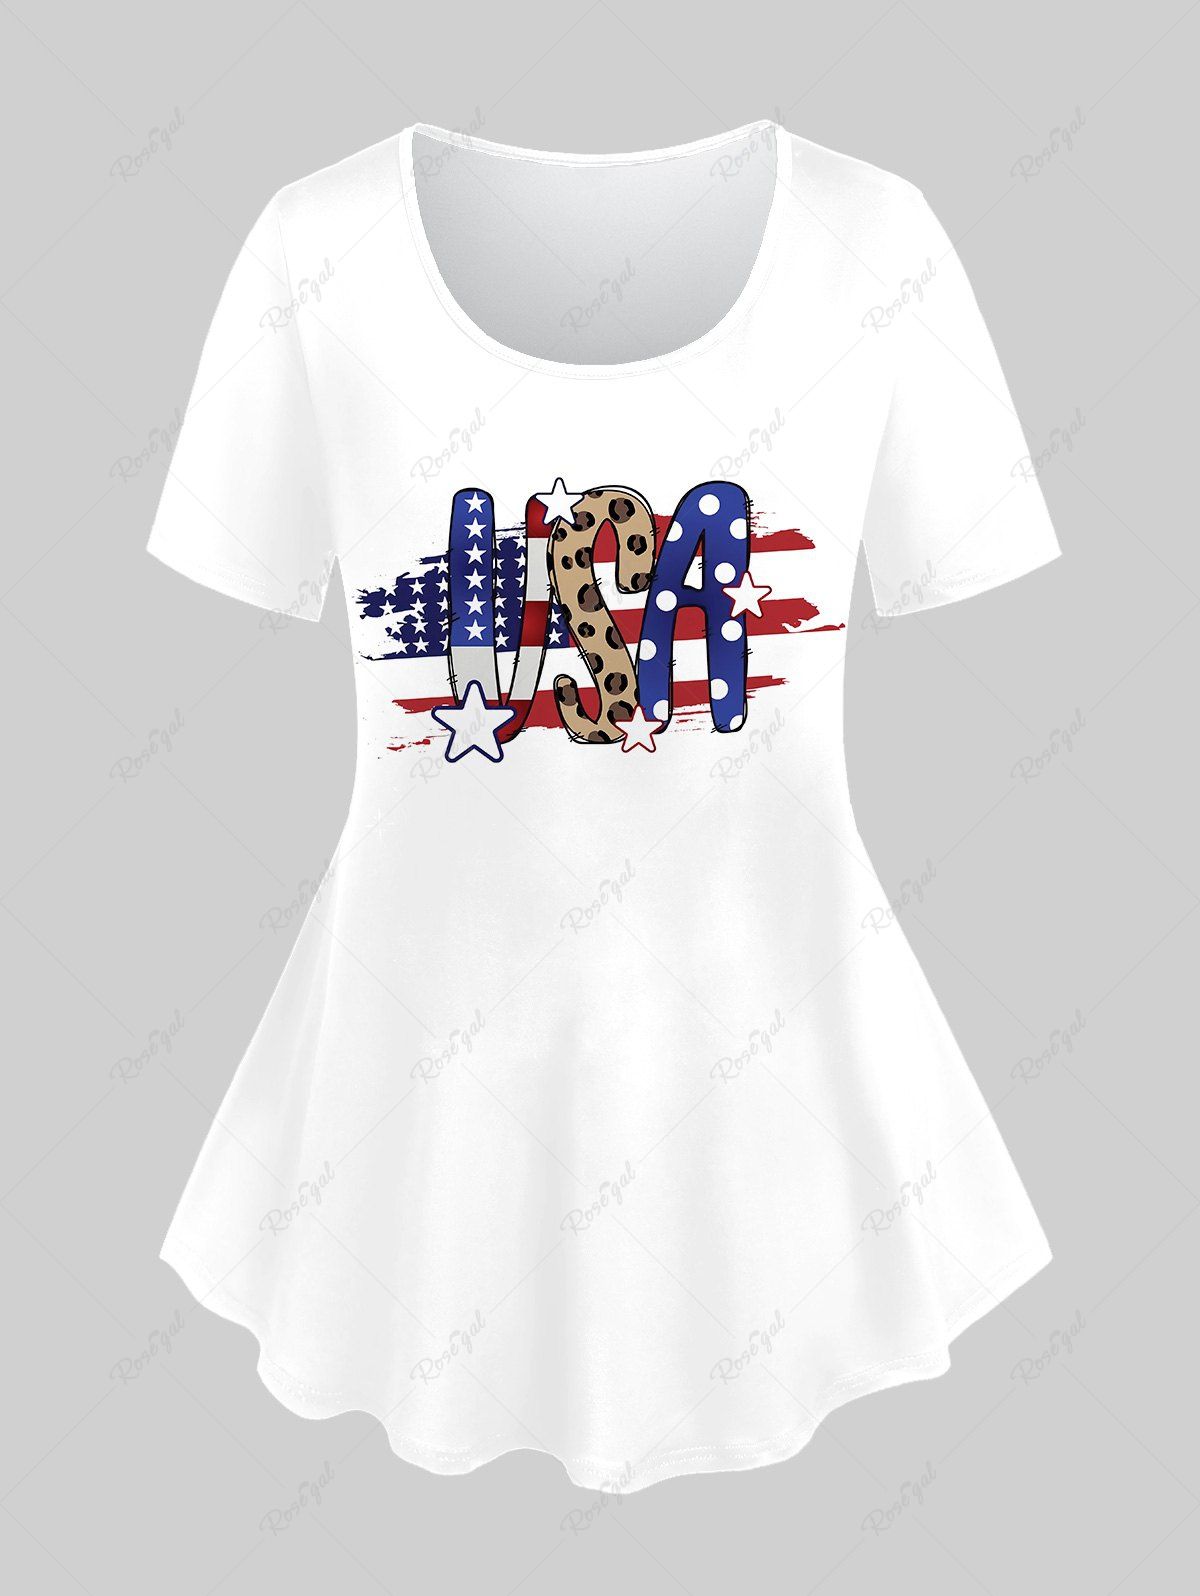 Hot Plus Size American Flag USA Printed Patriotic Graphic Tee  